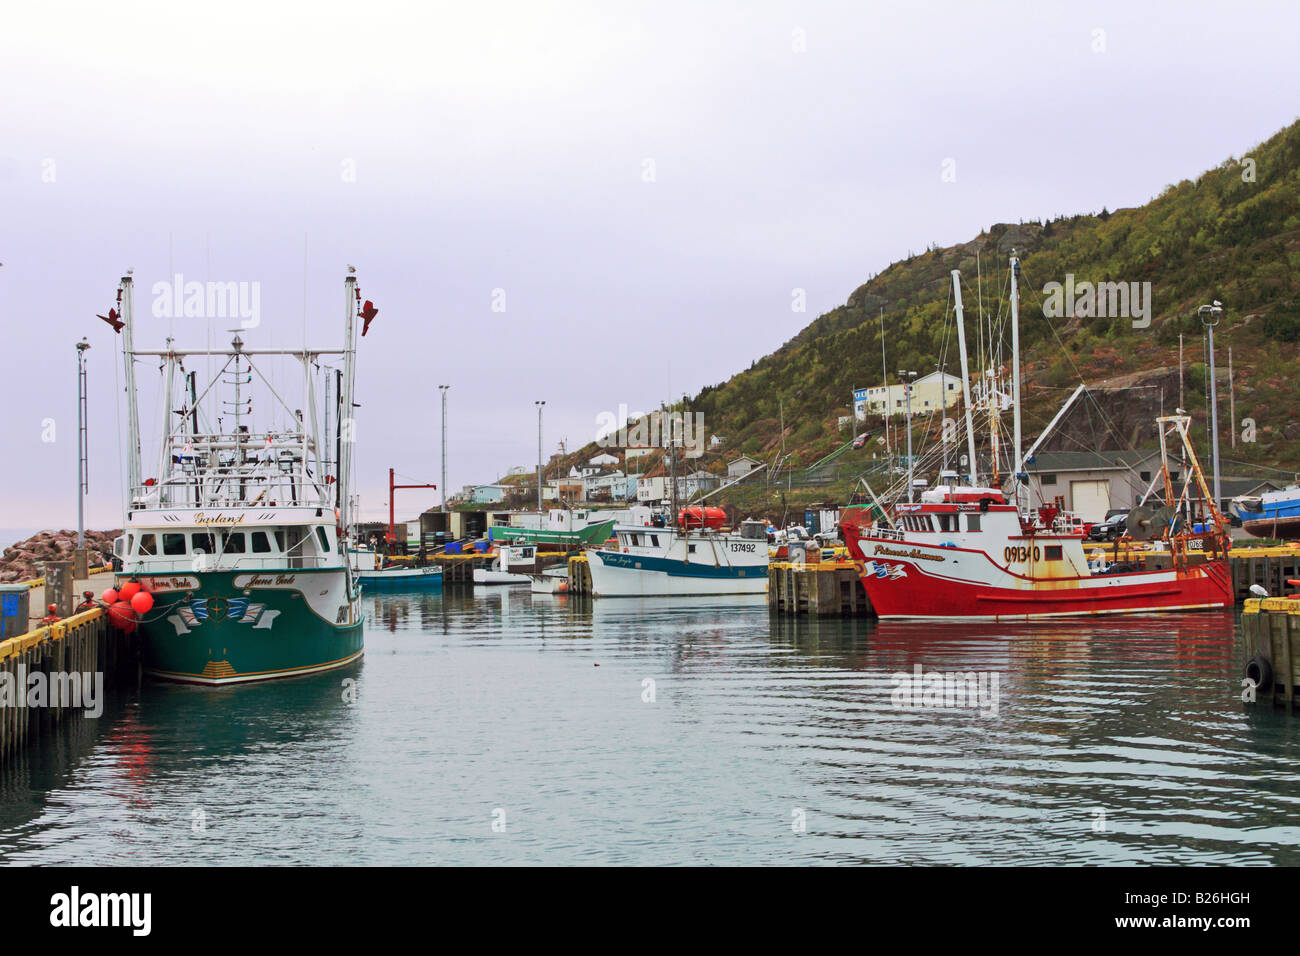 Industrial fishing boats in St John's Harbour, Newfoundland and Labrador, Canada Stock Photo